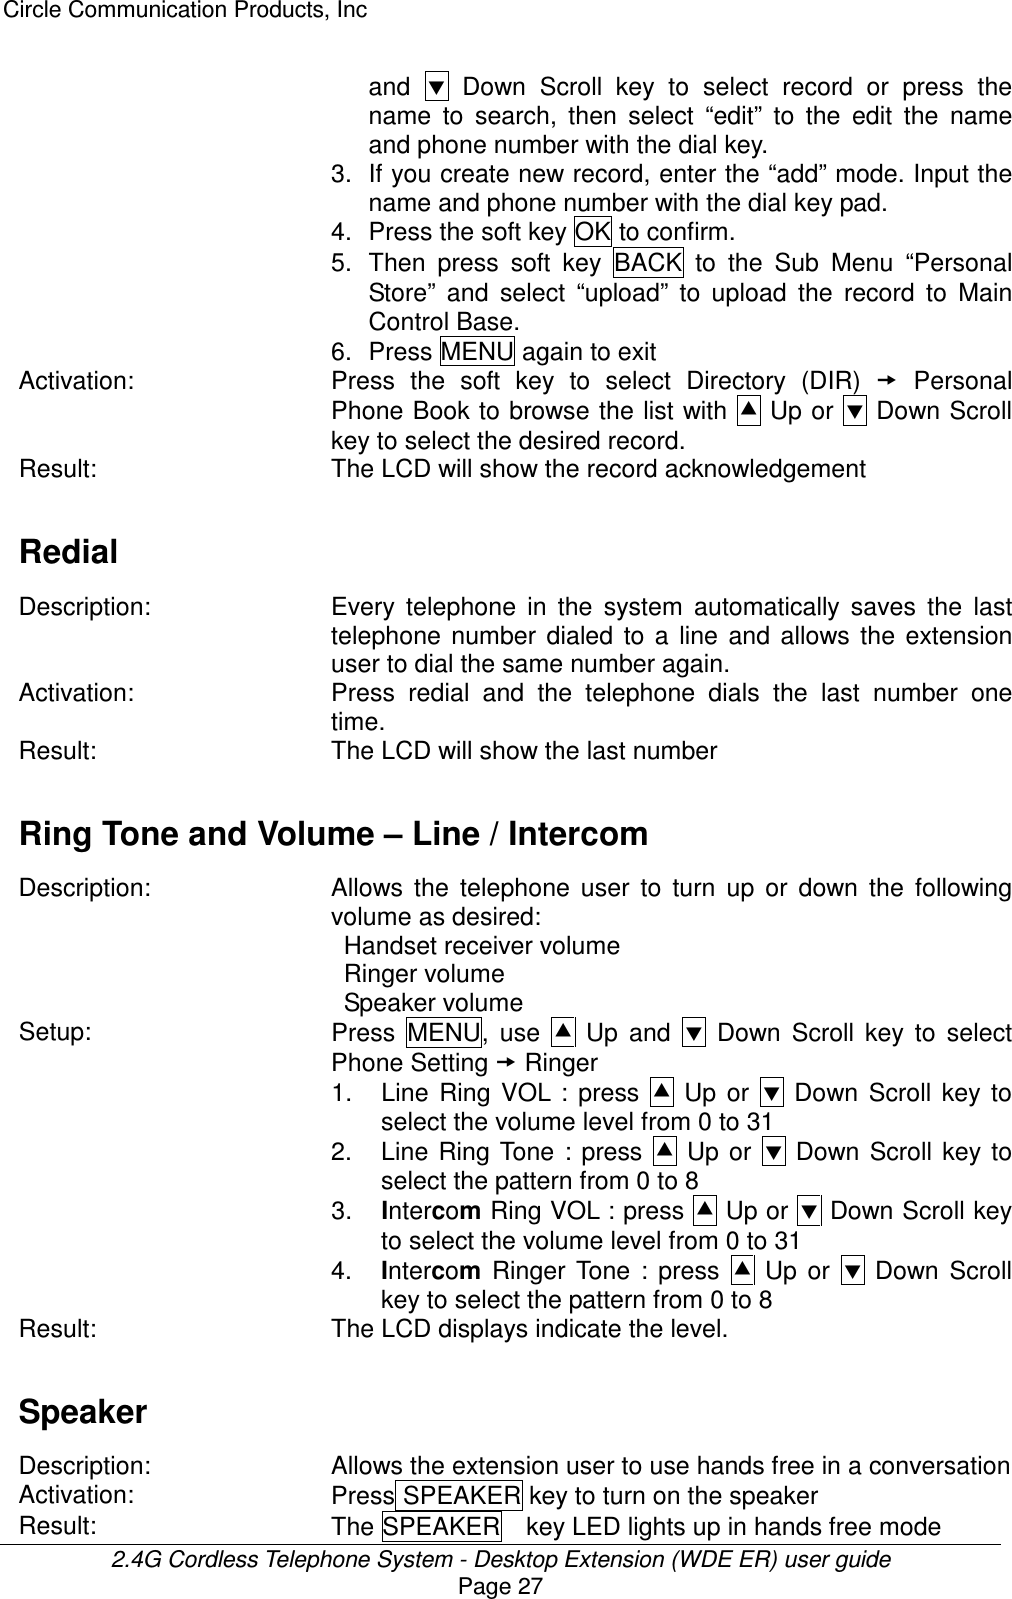 Circle Communication Products, Inc  2.4G Cordless Telephone System - Desktop Extension (WDE ER) user guide Page 27 and    Down  Scroll  key  to  select  record  or  press  the name  to  search,  then  select  “edit”  to  the  edit  the  name and phone number with the dial key. 3. If you create new record, enter the “add” mode. Input the name and phone number with the dial key pad. 4.  Press the soft key OK to confirm. 5.  Then  press  soft  key  BACK  to  the  Sub  Menu  “Personal Store”  and  select  “upload”  to  upload  the  record  to  Main Control Base.   6.  Press MENU again to exit Activation:  Press  the  soft  key  to  select  Directory  (DIR)    Personal Phone Book to browse the list with  Up or   Down Scroll key to select the desired record. Result:  The LCD will show the record acknowledgement  Redial  Description: Every  telephone  in  the  system  automatically  saves  the  last telephone  number  dialed  to  a  line  and  allows  the  extension user to dial the same number again. Activation:  Press  redial  and  the  telephone  dials  the  last  number  one time. Result:  The LCD will show the last number    Ring Tone and Volume – Line / Intercom  Description: Allows  the  telephone  user  to  turn  up  or  down  the  following volume as desired:   Handset receiver volume   Ringer volume   Speaker volume Setup:  Press  MENU,  use    Up  and    Down  Scroll  key  to  select Phone Setting  Ringer   1.  Line  Ring  VOL  :  press    Up  or    Down  Scroll  key  to select the volume level from 0 to 31 2.  Line  Ring Tone  :  press    Up  or    Down  Scroll  key  to select the pattern from 0 to 8 3.  Intercom Ring VOL : press   Up or  Down Scroll key to select the volume level from 0 to 31 4.  Intercom  Ringer  Tone  :  press    Up  or    Down  Scroll key to select the pattern from 0 to 8 Result:  The LCD displays indicate the level.  Speaker  Description:  Allows the extension user to use hands free in a conversation Activation:  Press SPEAKER key to turn on the speaker   Result:  The SPEAKER    key LED lights up in hands free mode 